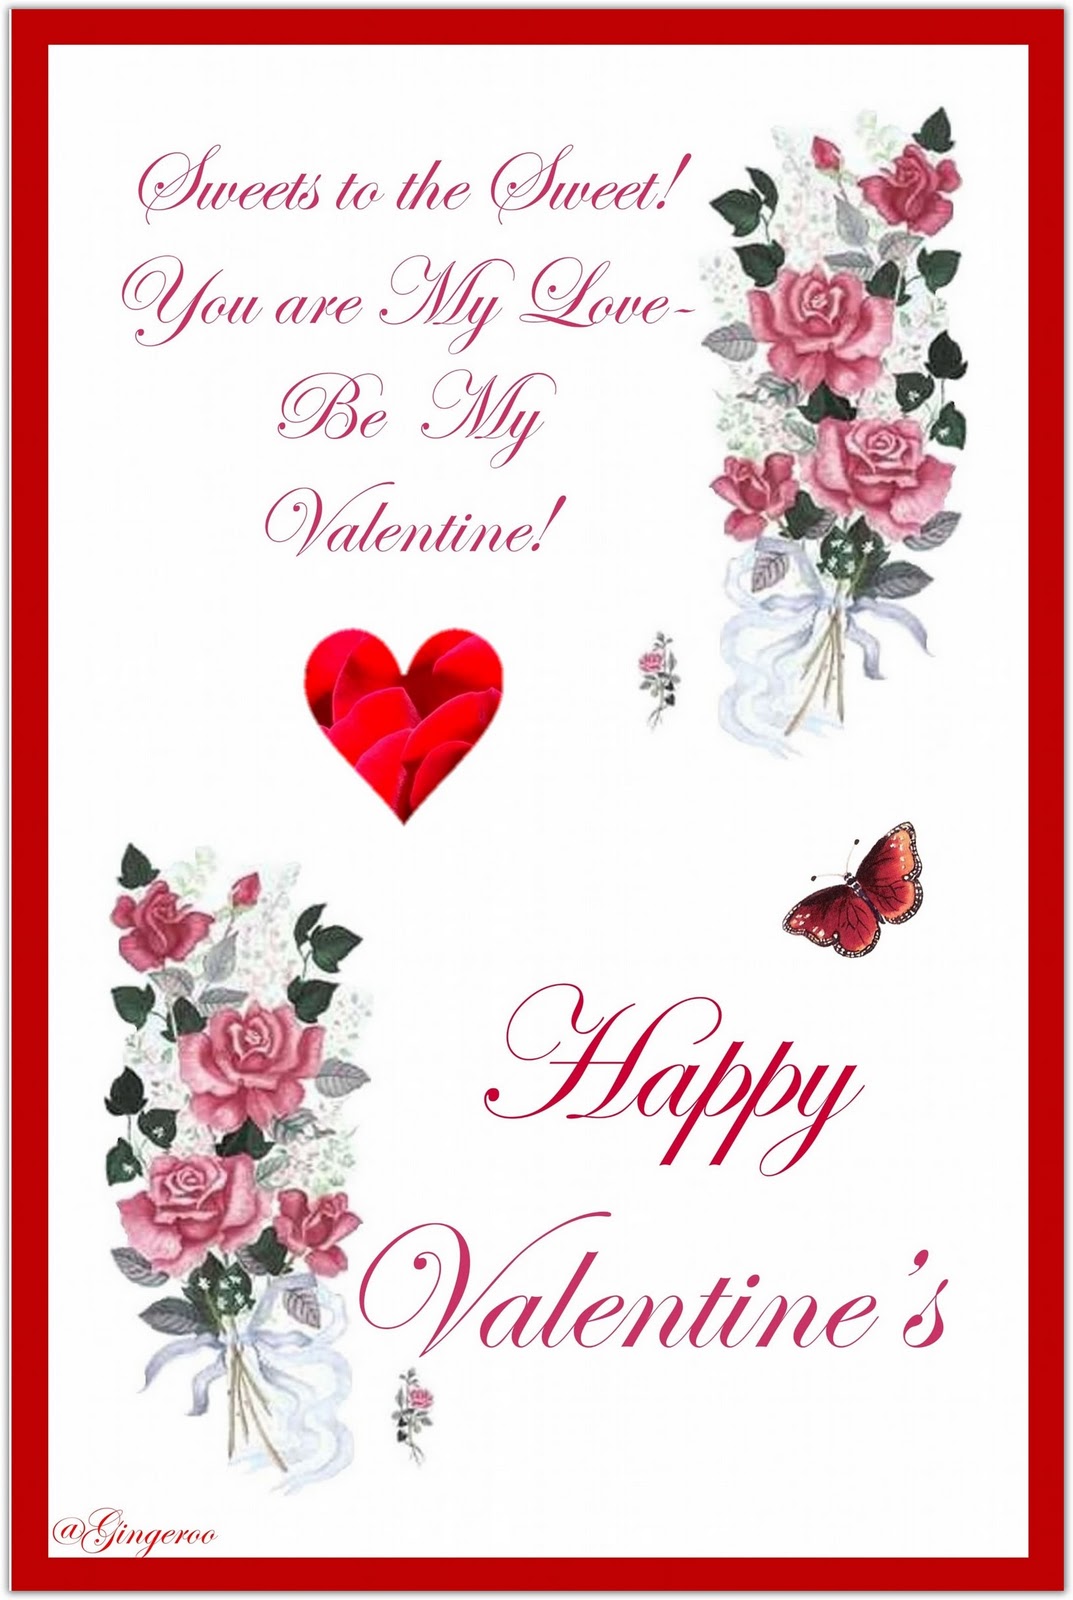 01 Birthday Wishes: The Valentine's Day Card - What is It's History?1073 x 1600